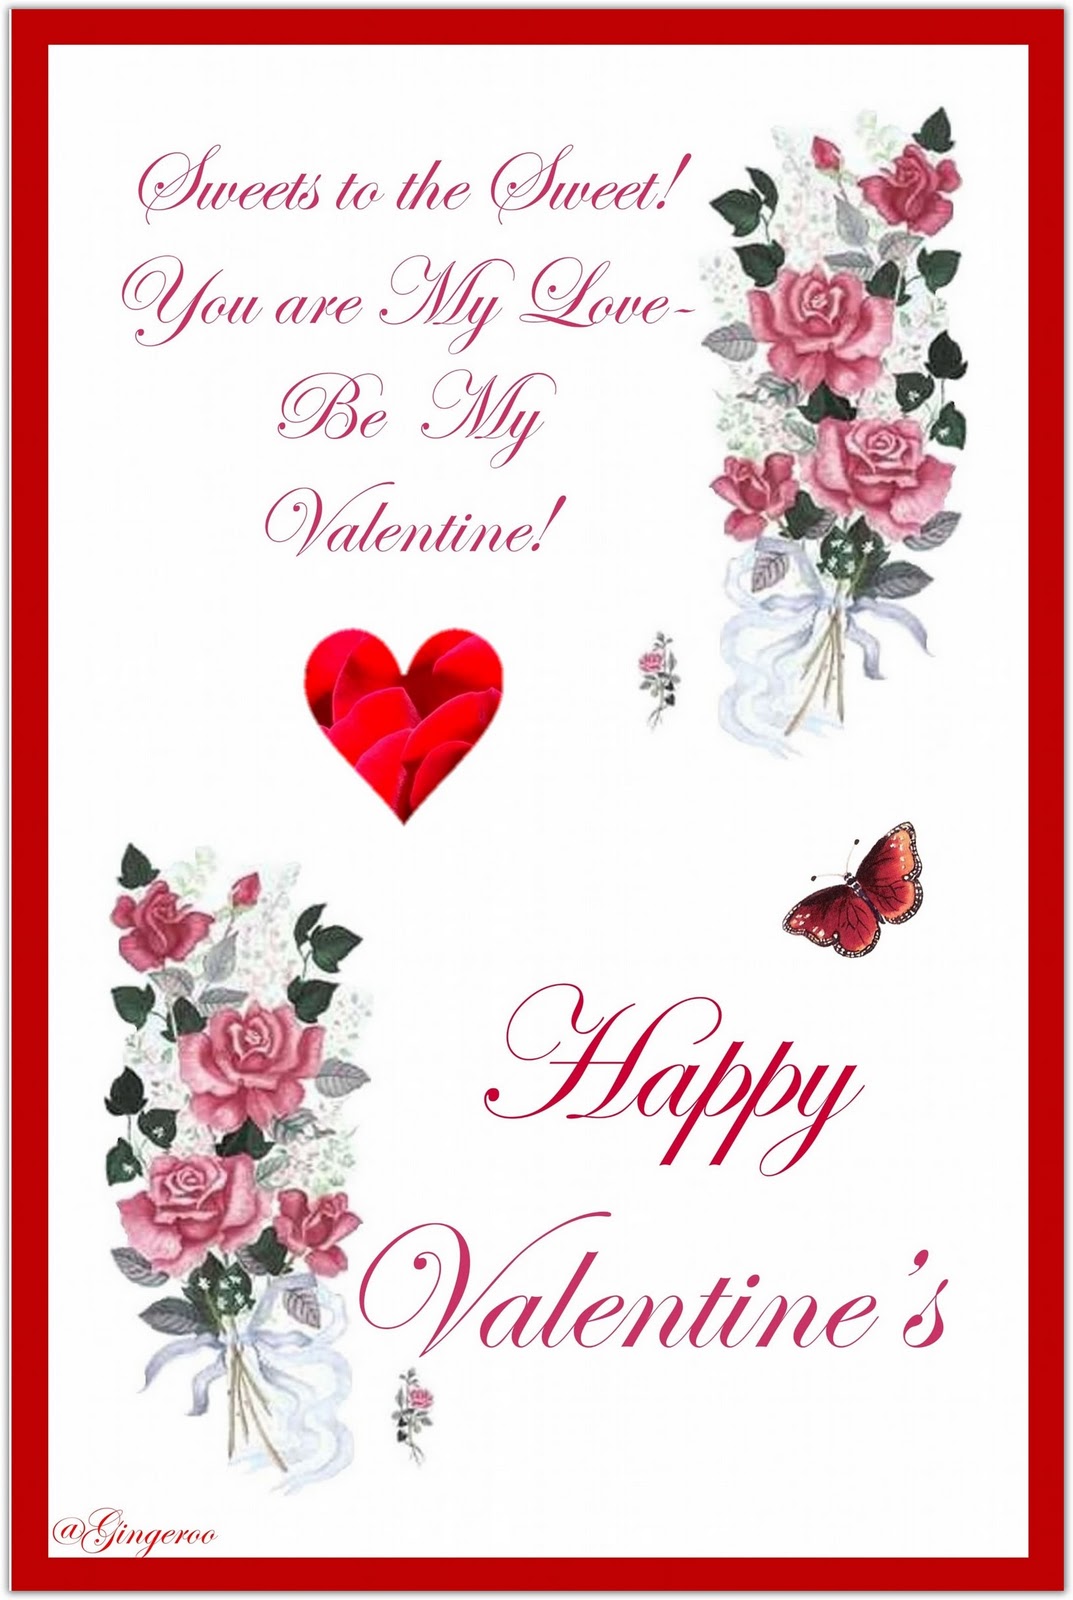 01 Birthday Wishes: The Valentine's Day Card - What is It's History?1073 x 1600